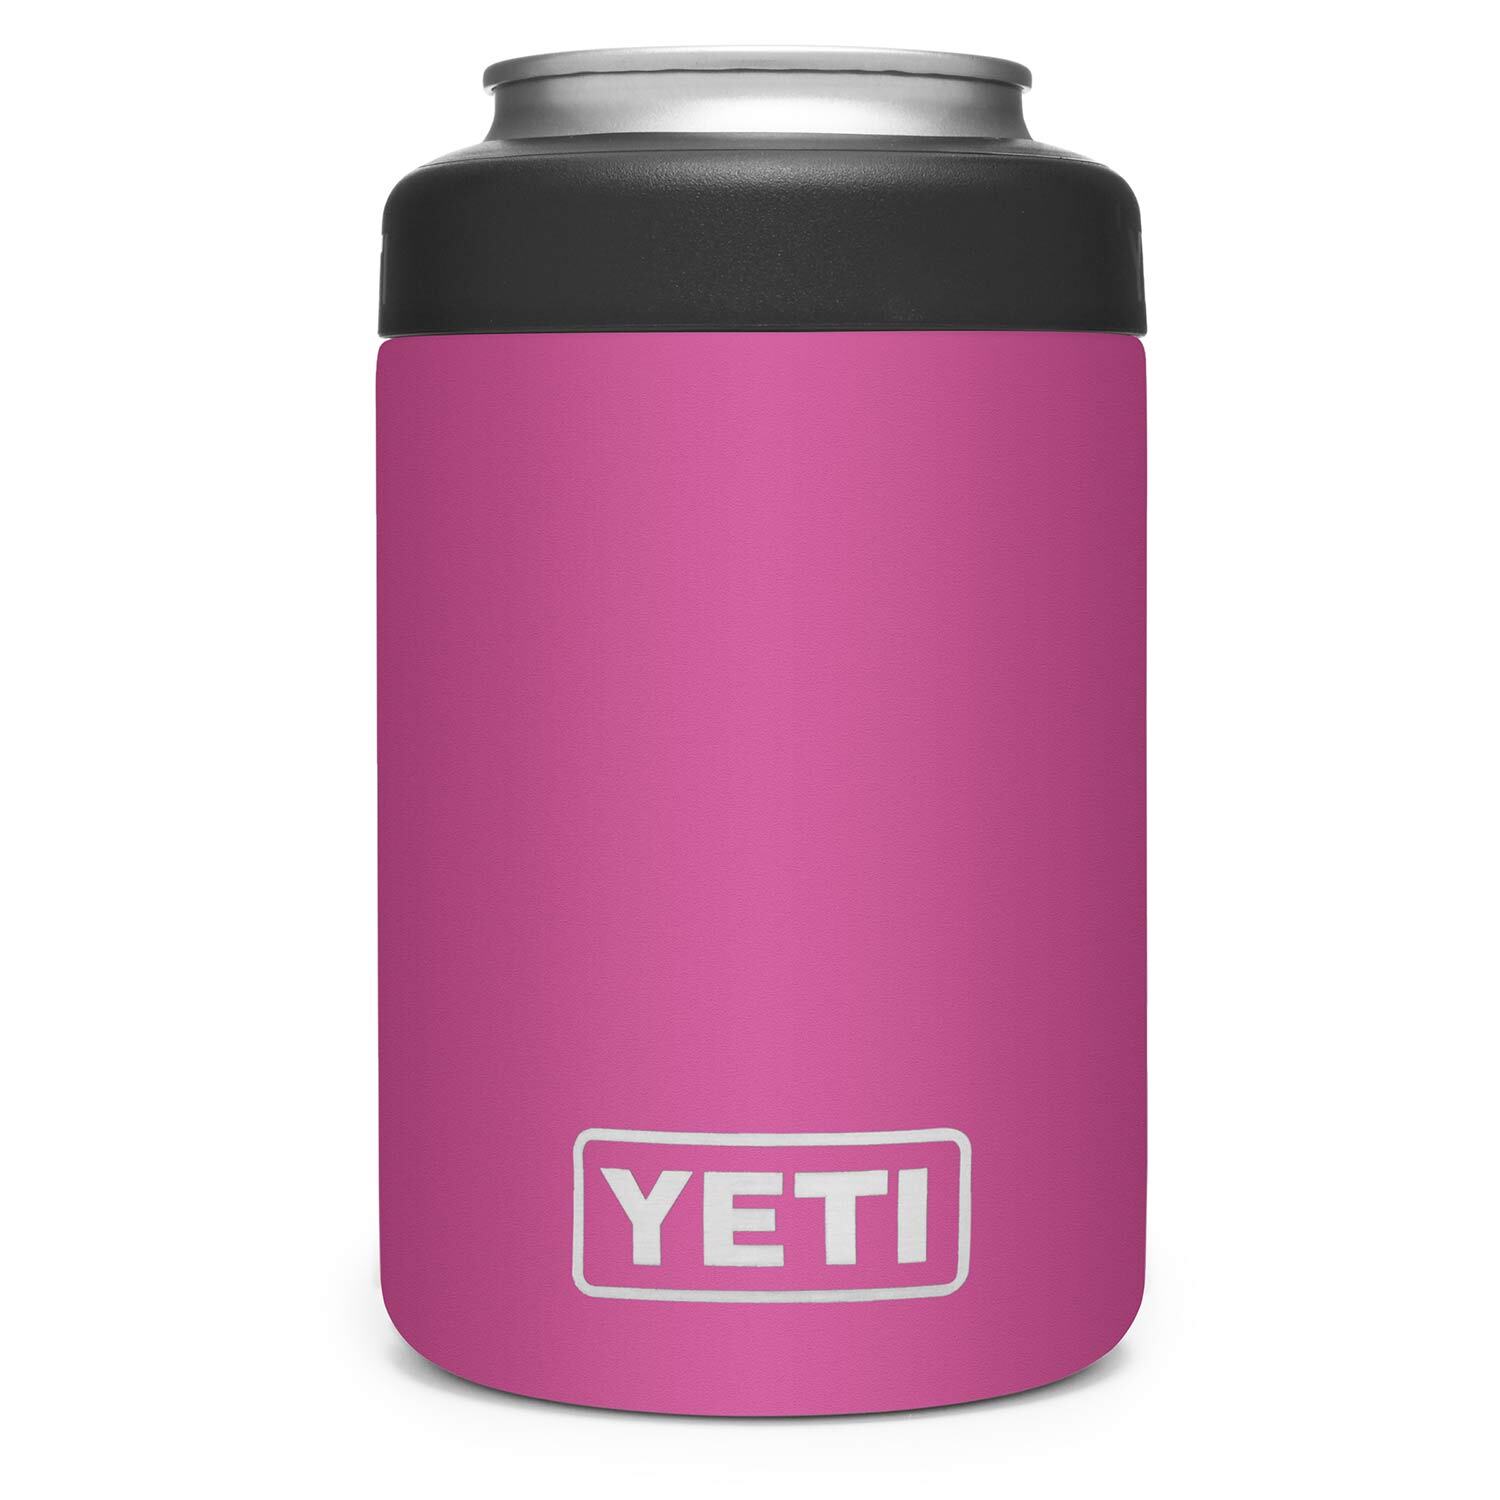 YETI Rambler Colster Can Insulator - Harvest Red - TackleDirect